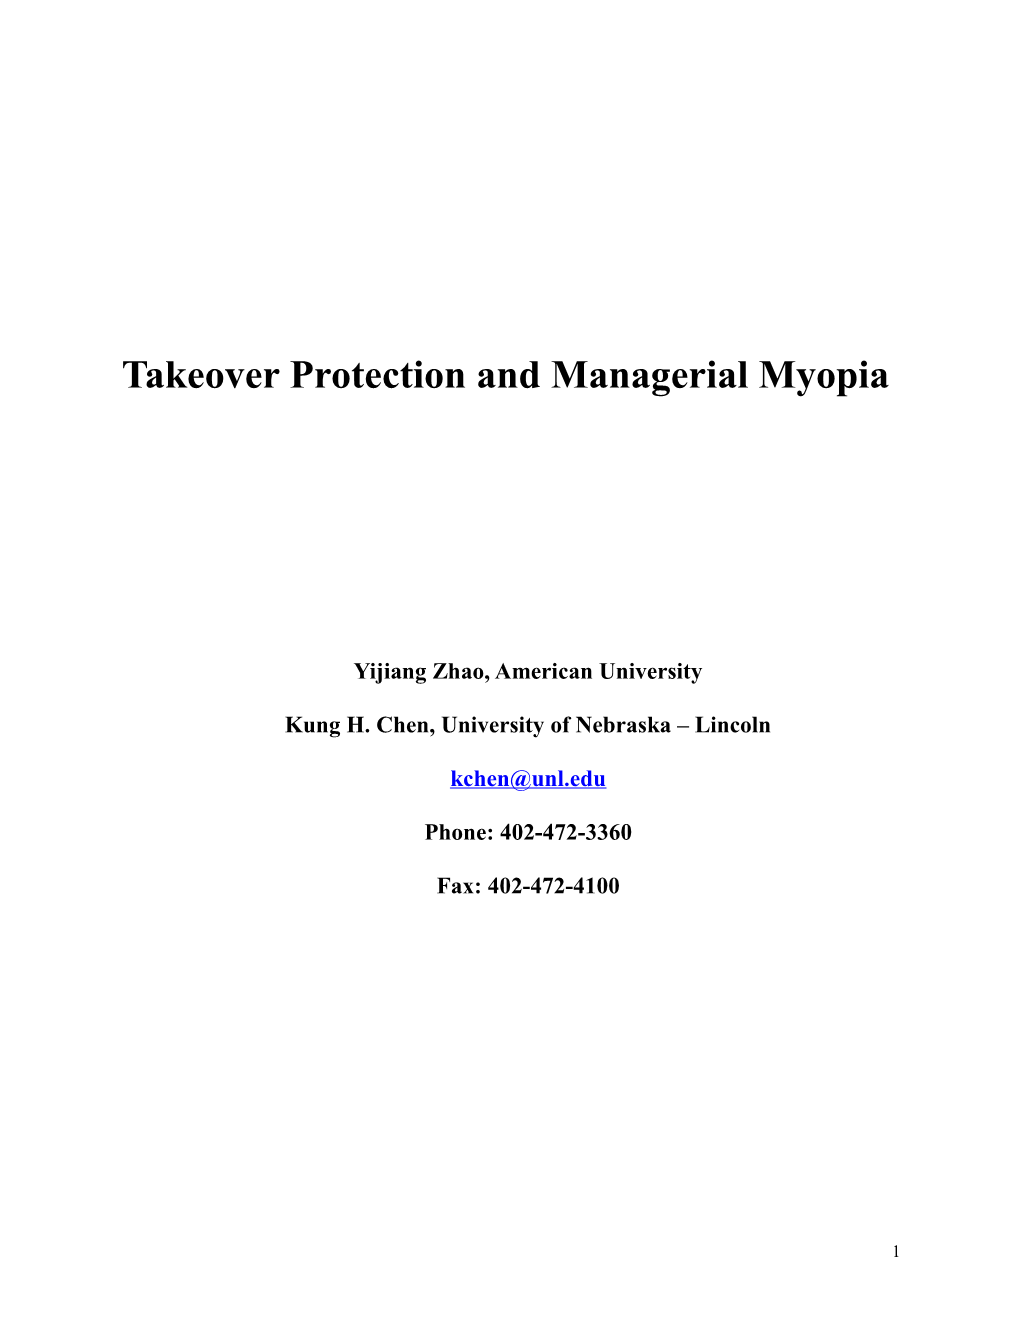 Takeover Protection and Managerial Myopia: Evidence From